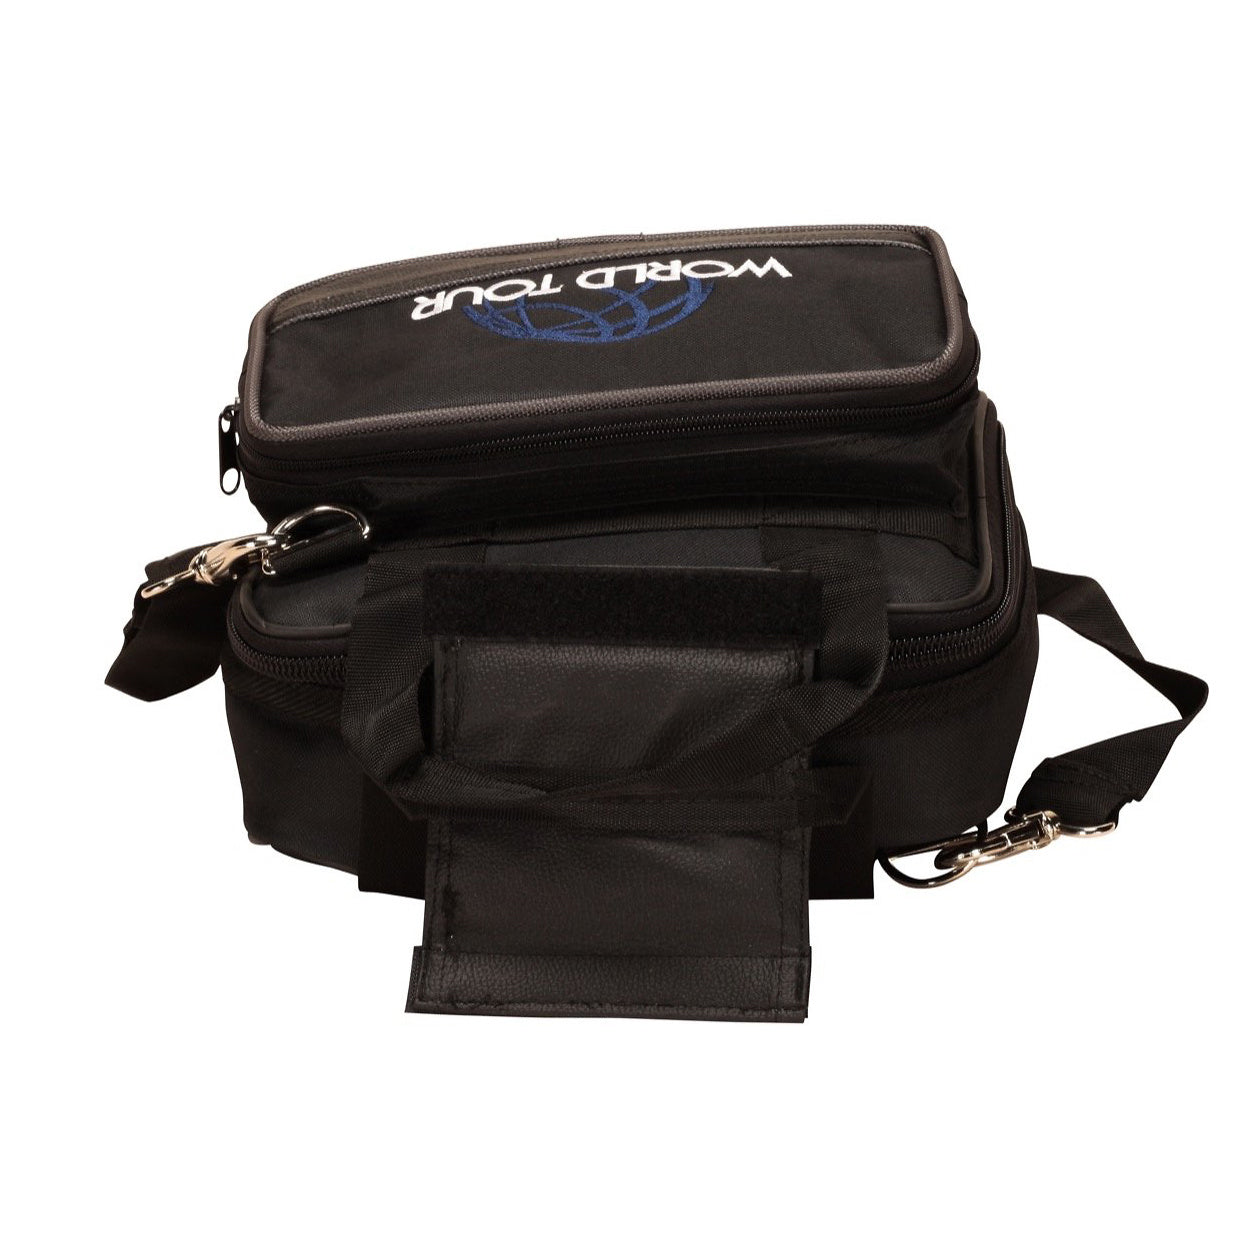 World Tour Gig Bag, 14.5 x 11 x 3.25 in.